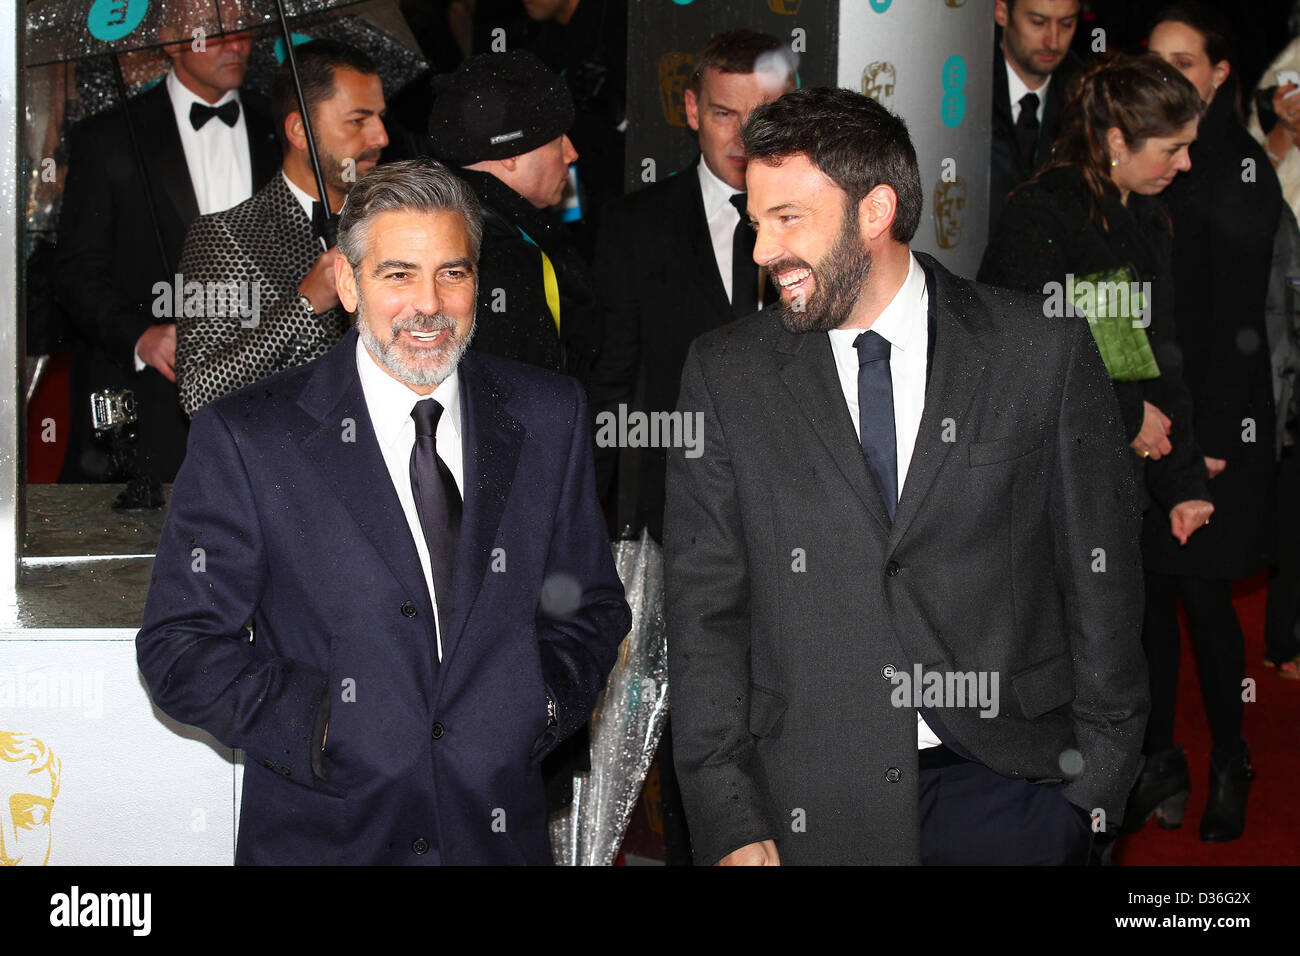 George Clooney & Ben Affleck arrive for the EE British Academy Film Awards - Red Carpet Arrivals at the Royal Opera House. Credi Stock Photo